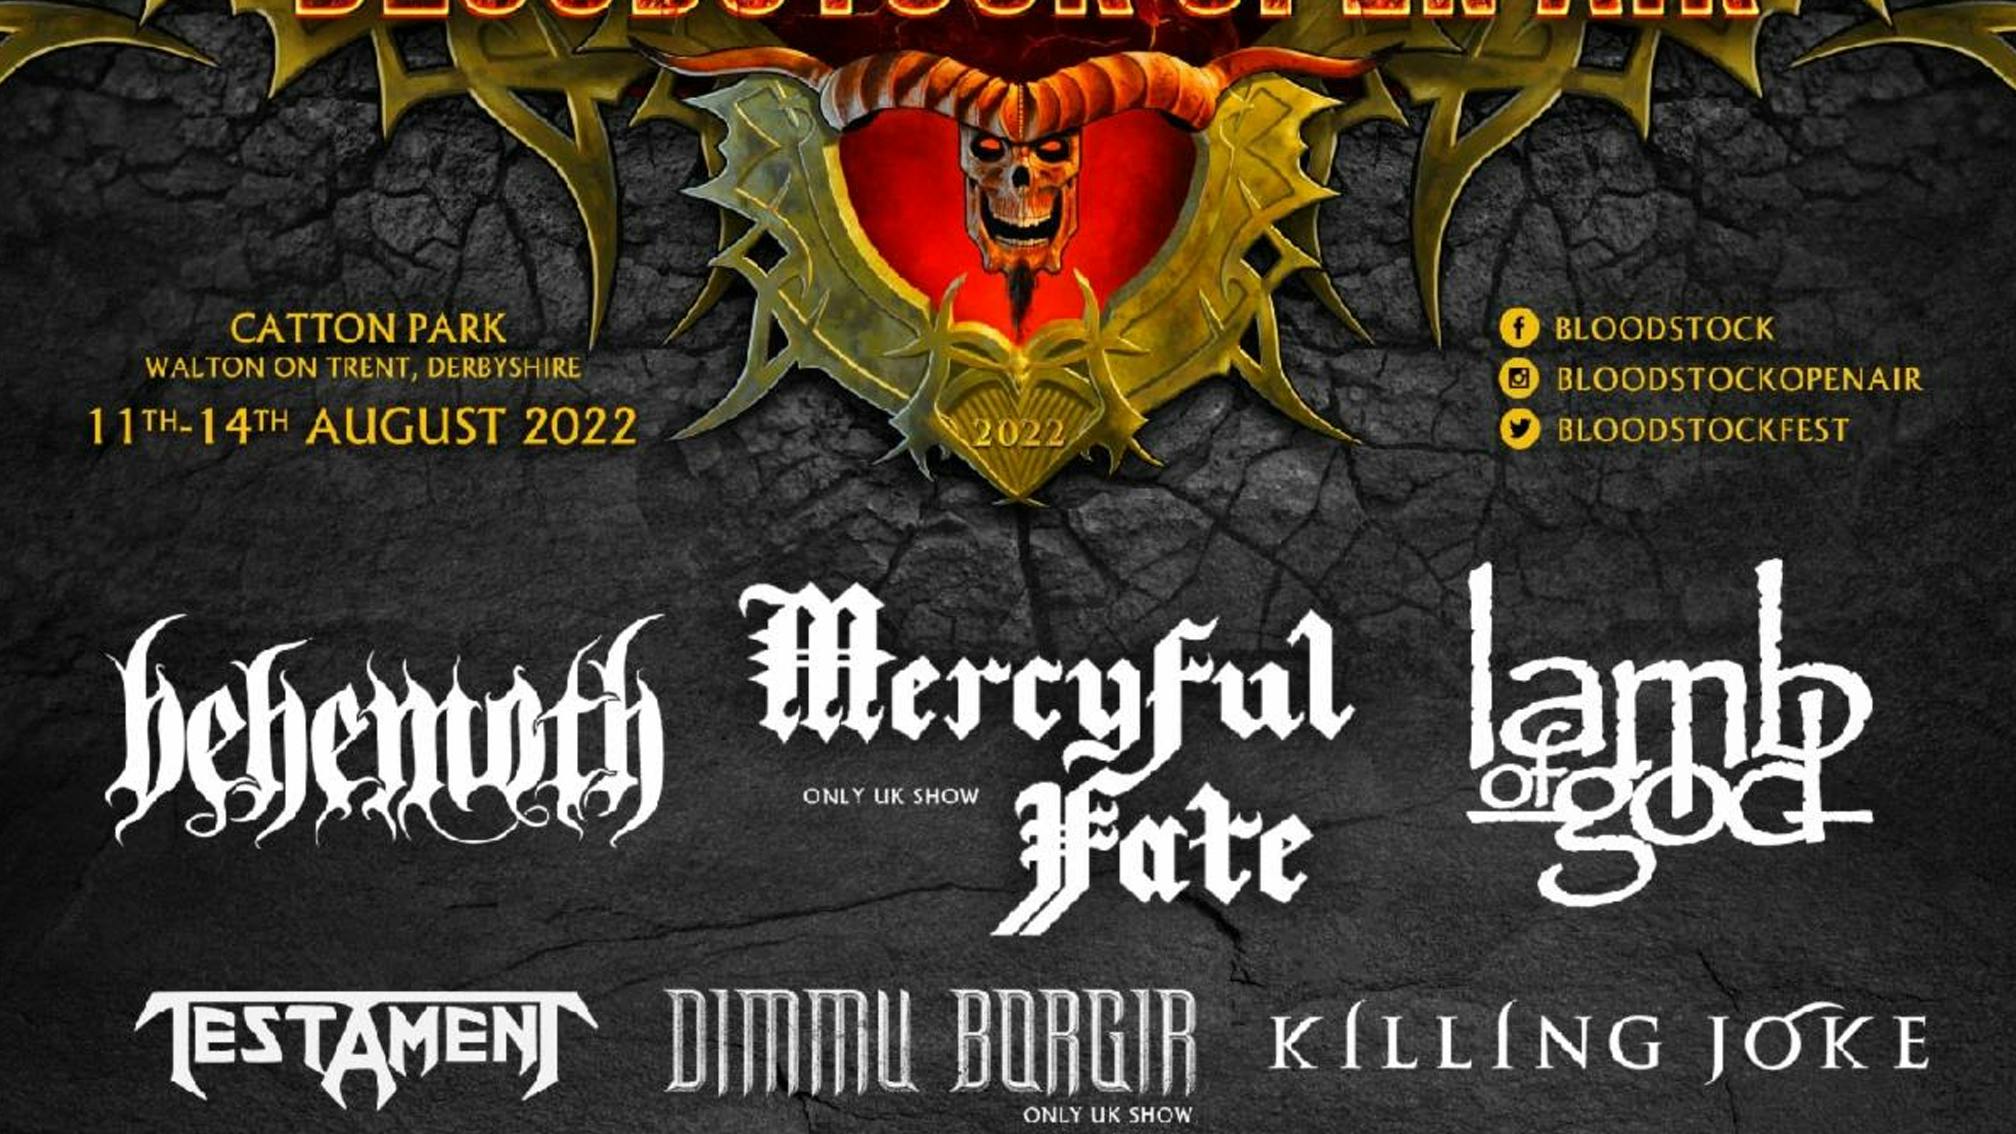 Bloodstock add 9 more bands to next year's line-up